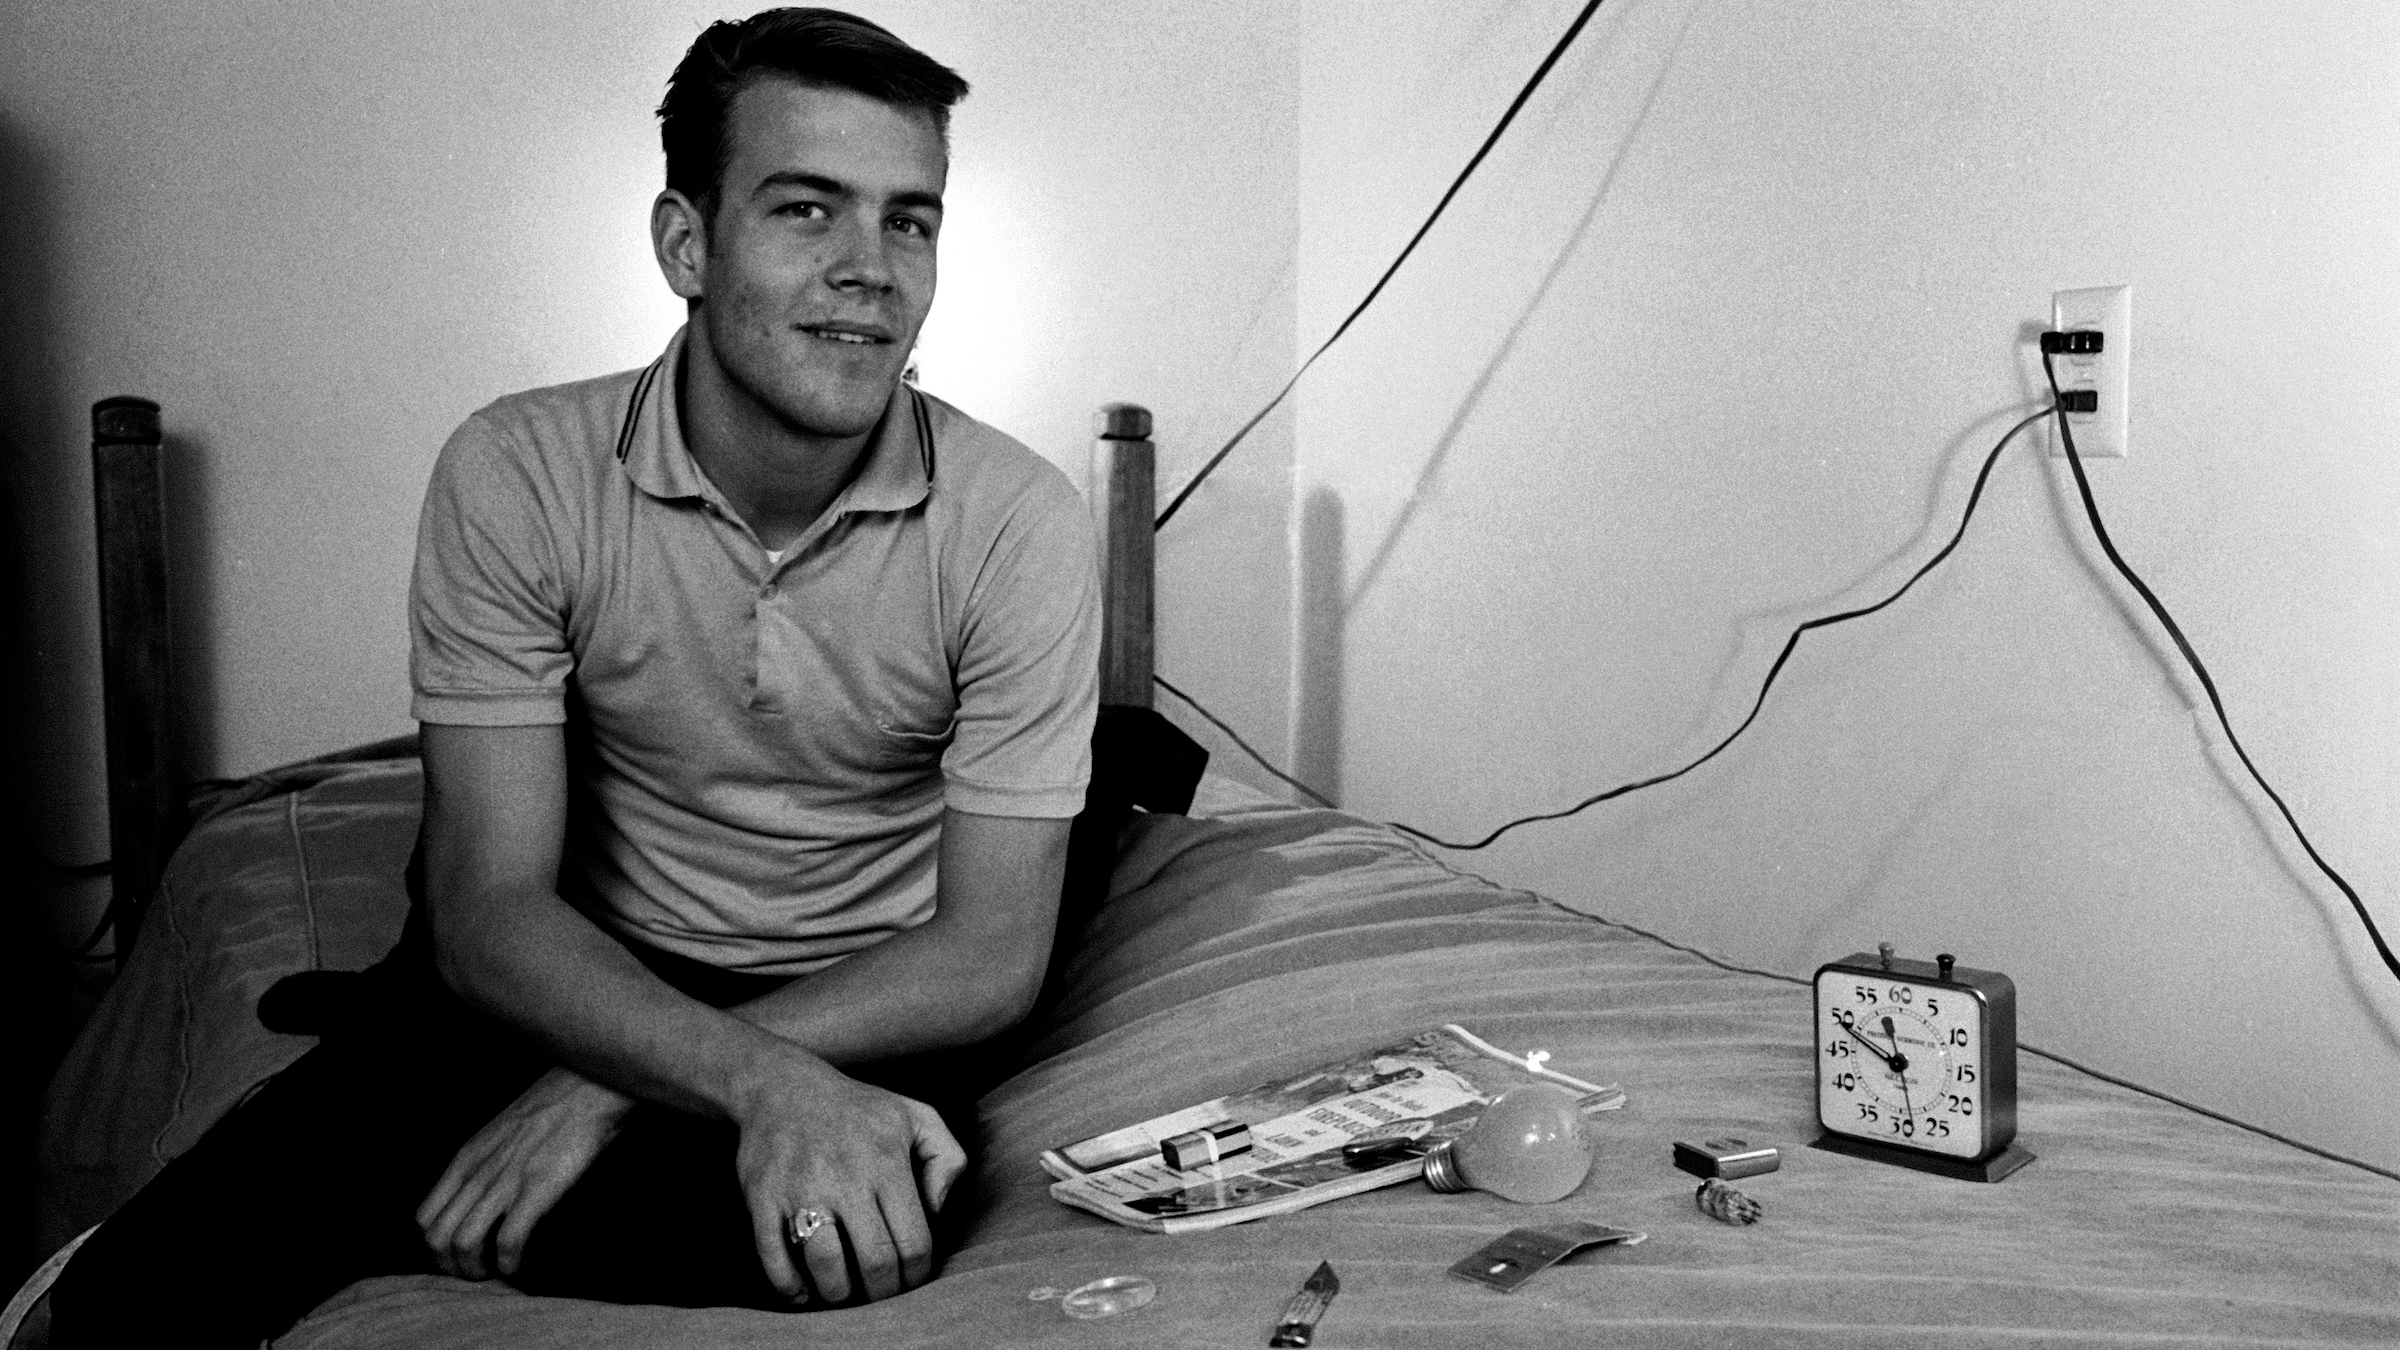 American student Randy Gardner sits on a bed next to various household object he will later have to identify by memory as part of a sleep deprivation experiment, San Diego, California, 1964.